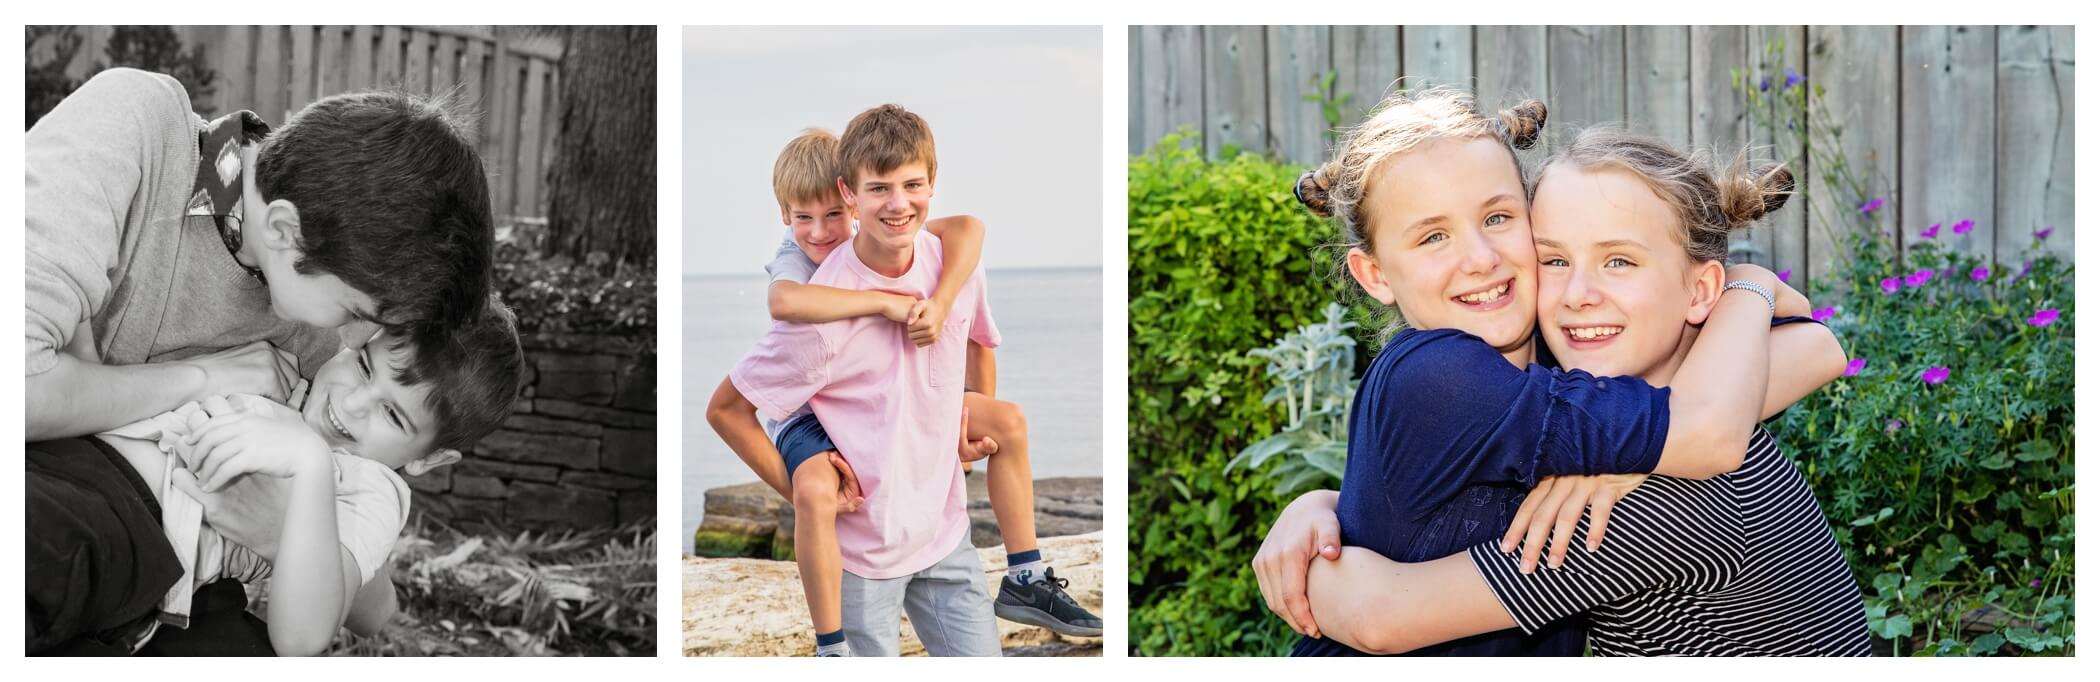 three photos of kids having fun in family photo session